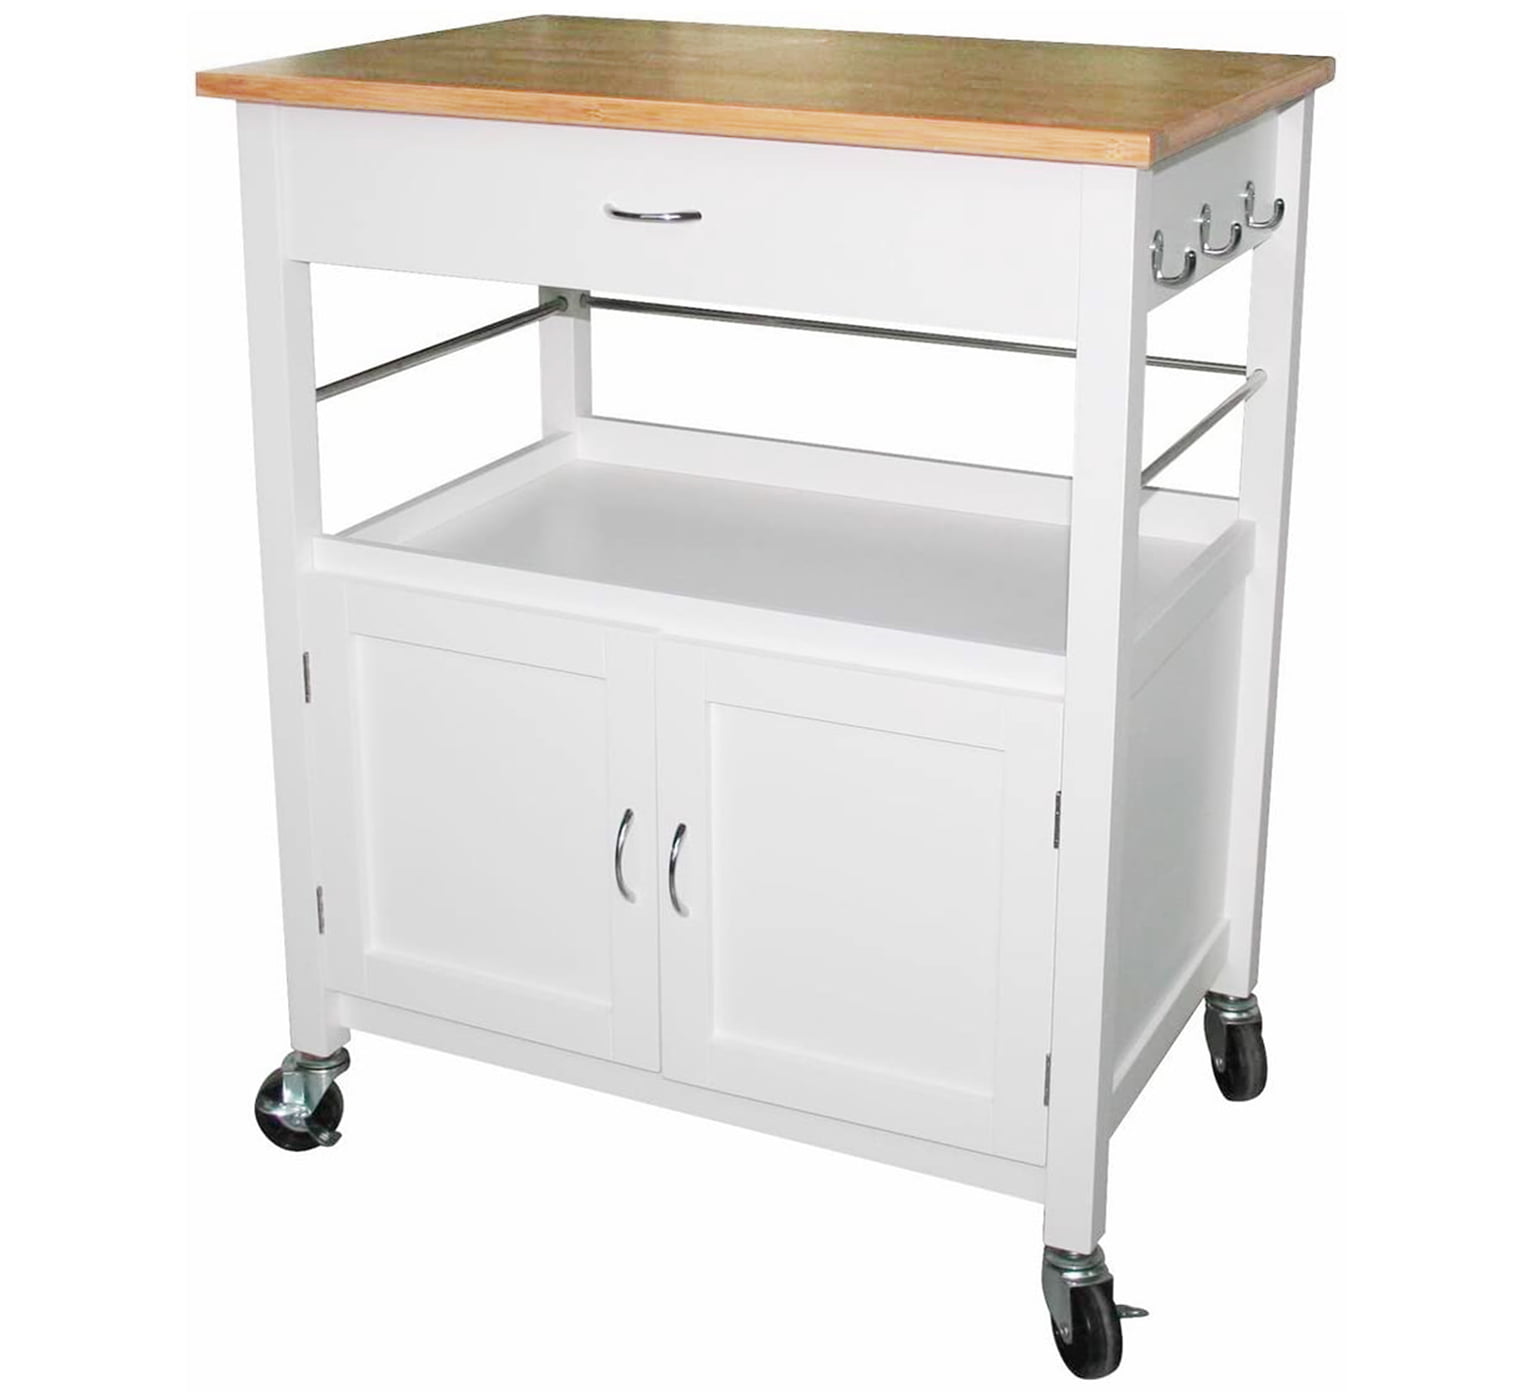 eHemco Kitchen Island Cart with Natural Bamboo Top Butcher Block, White Base